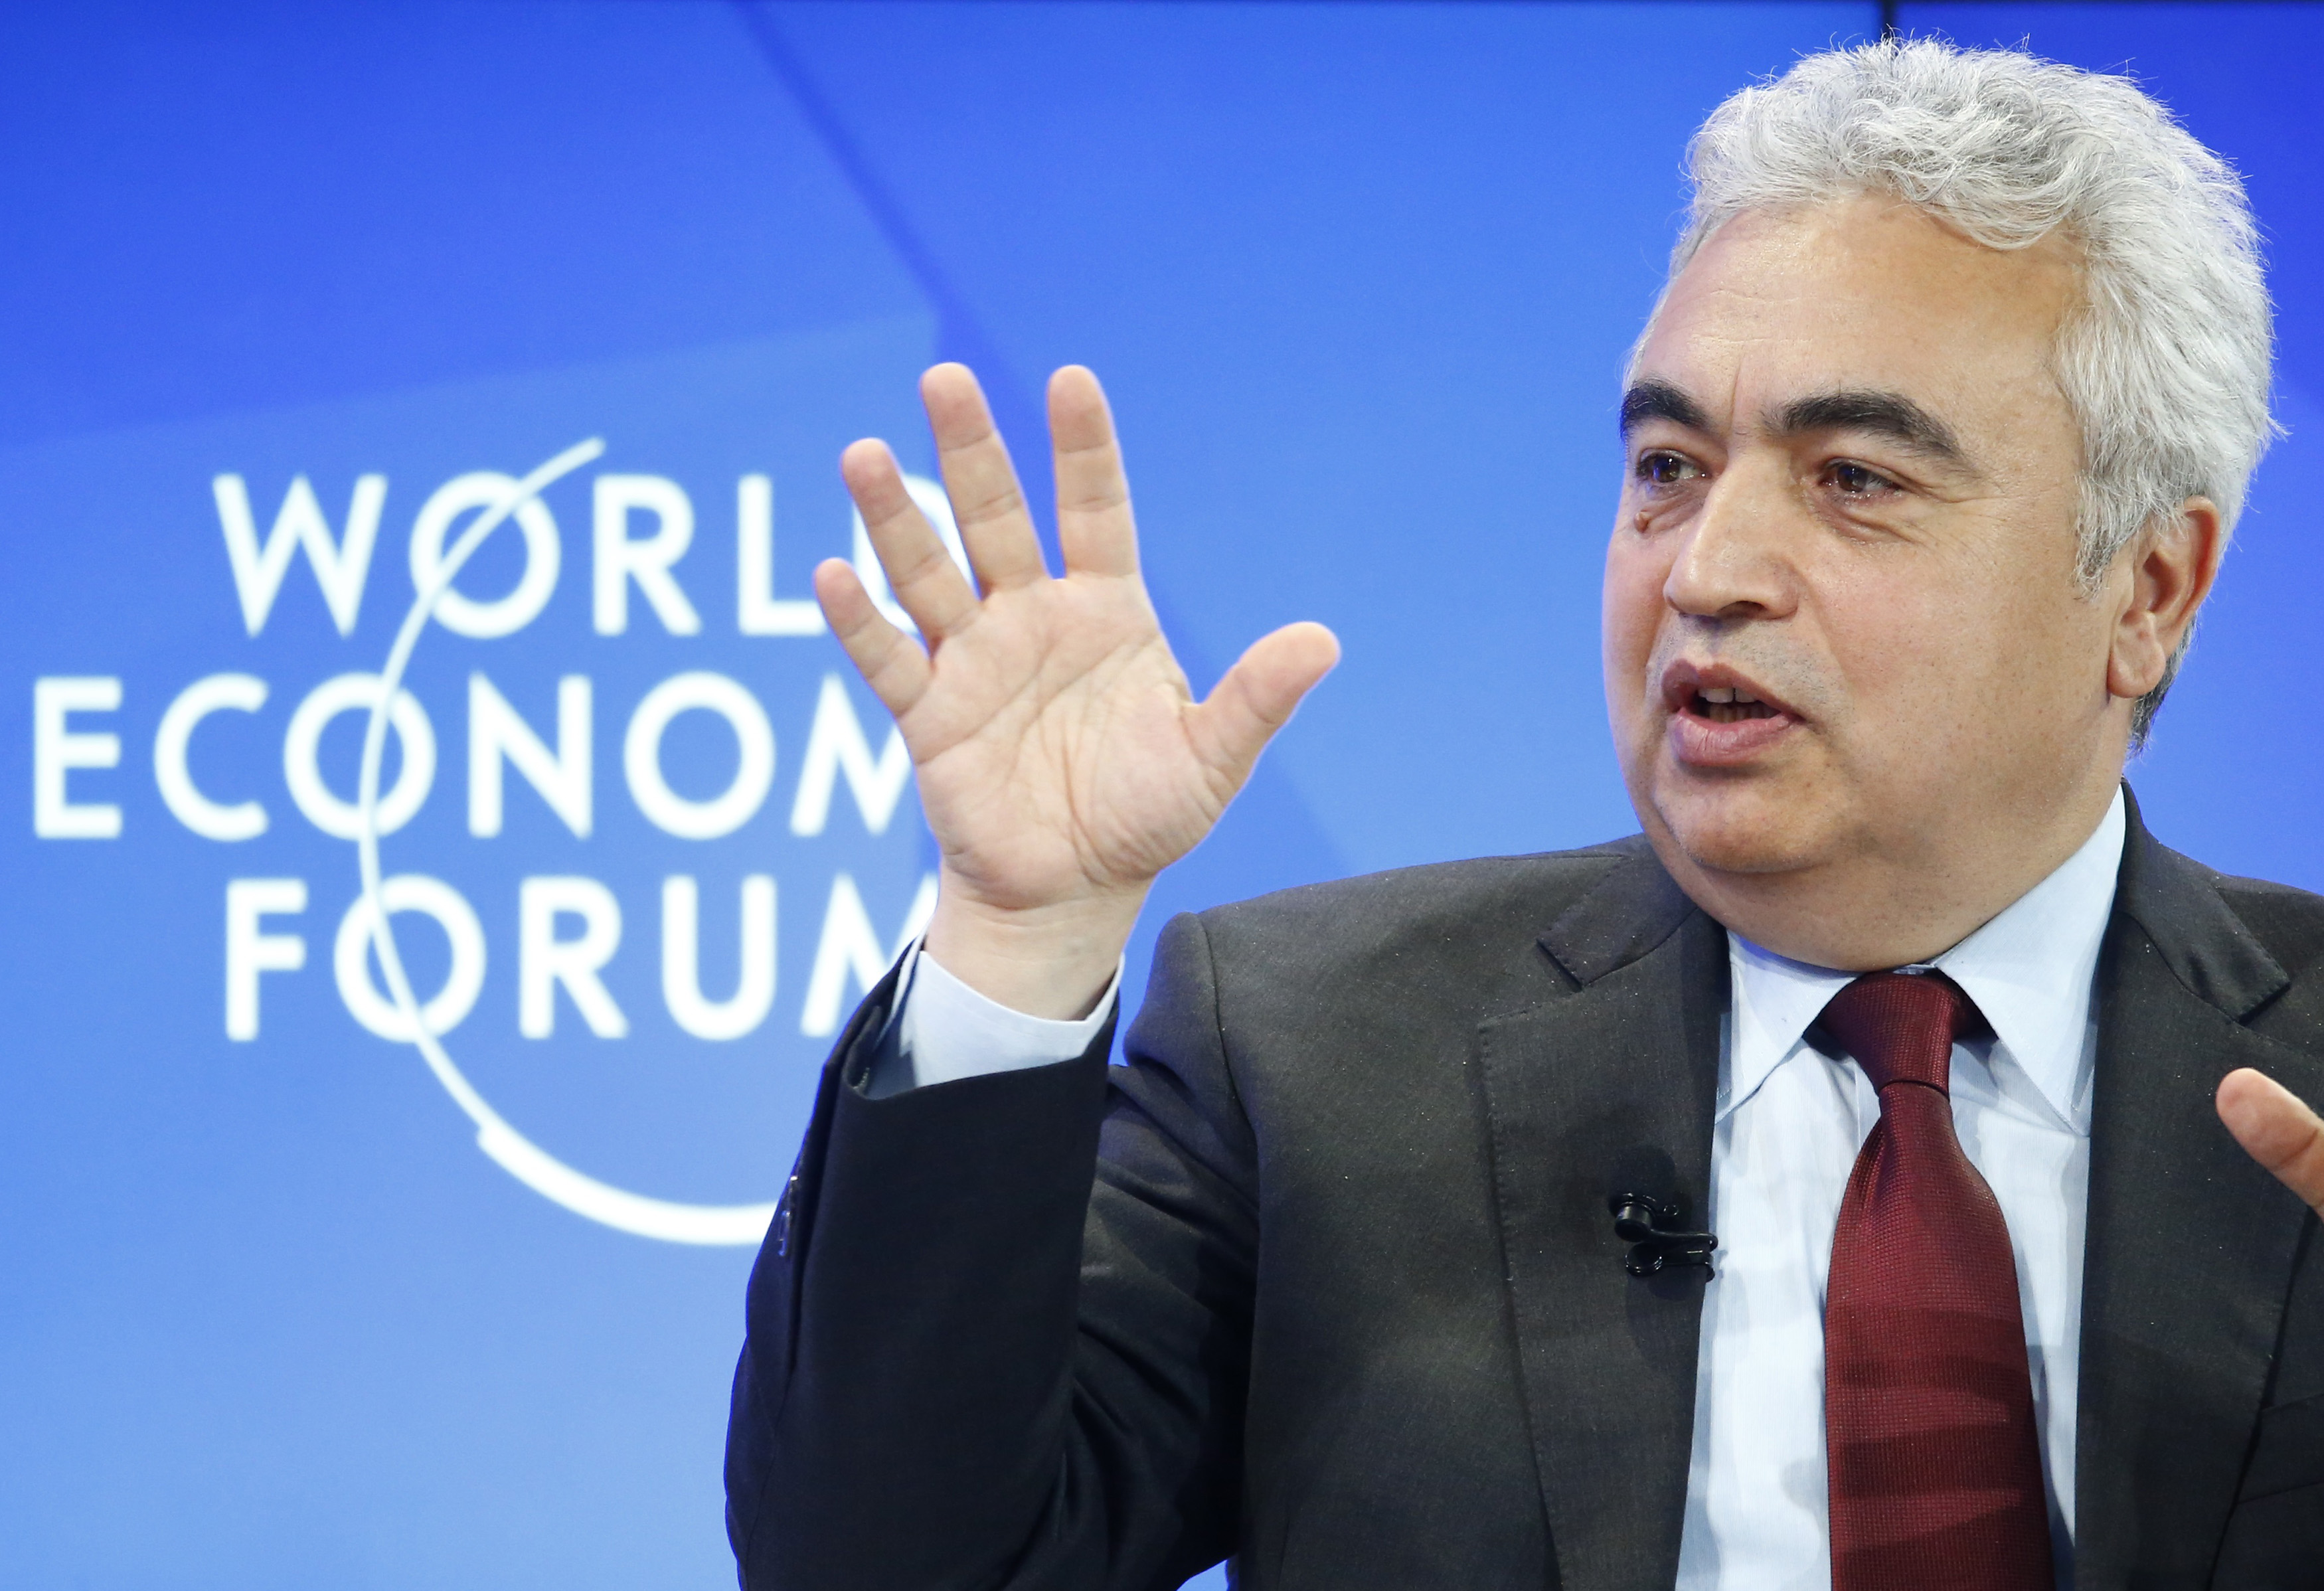 Birol Executive Director of the International Energy Agency attends the WEF annual meeting in Davos